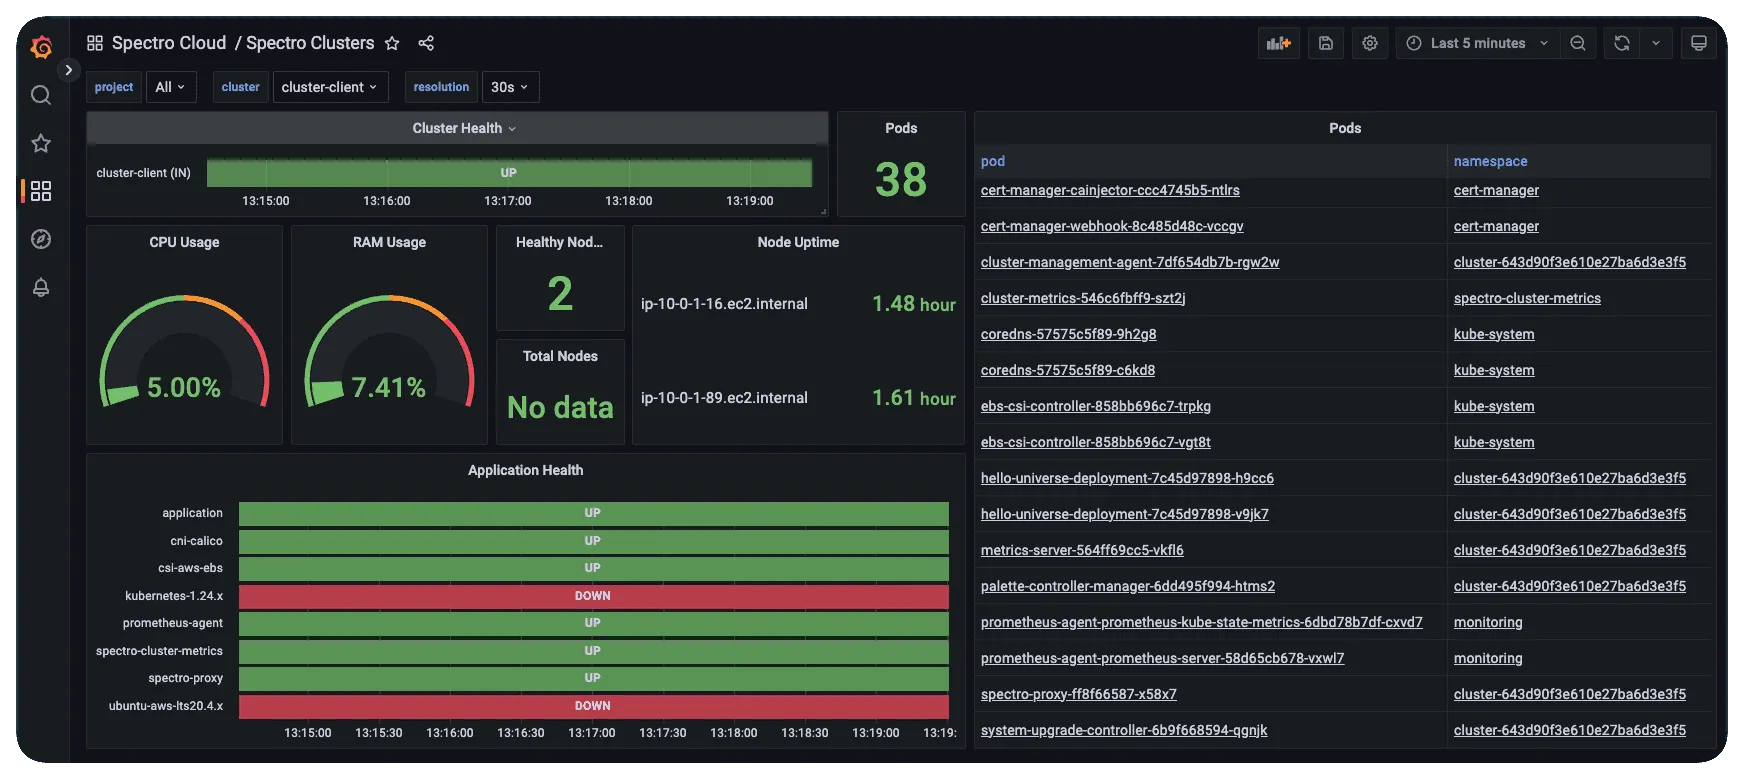 A grafana dashboard view of the cluster metric displaying pack status